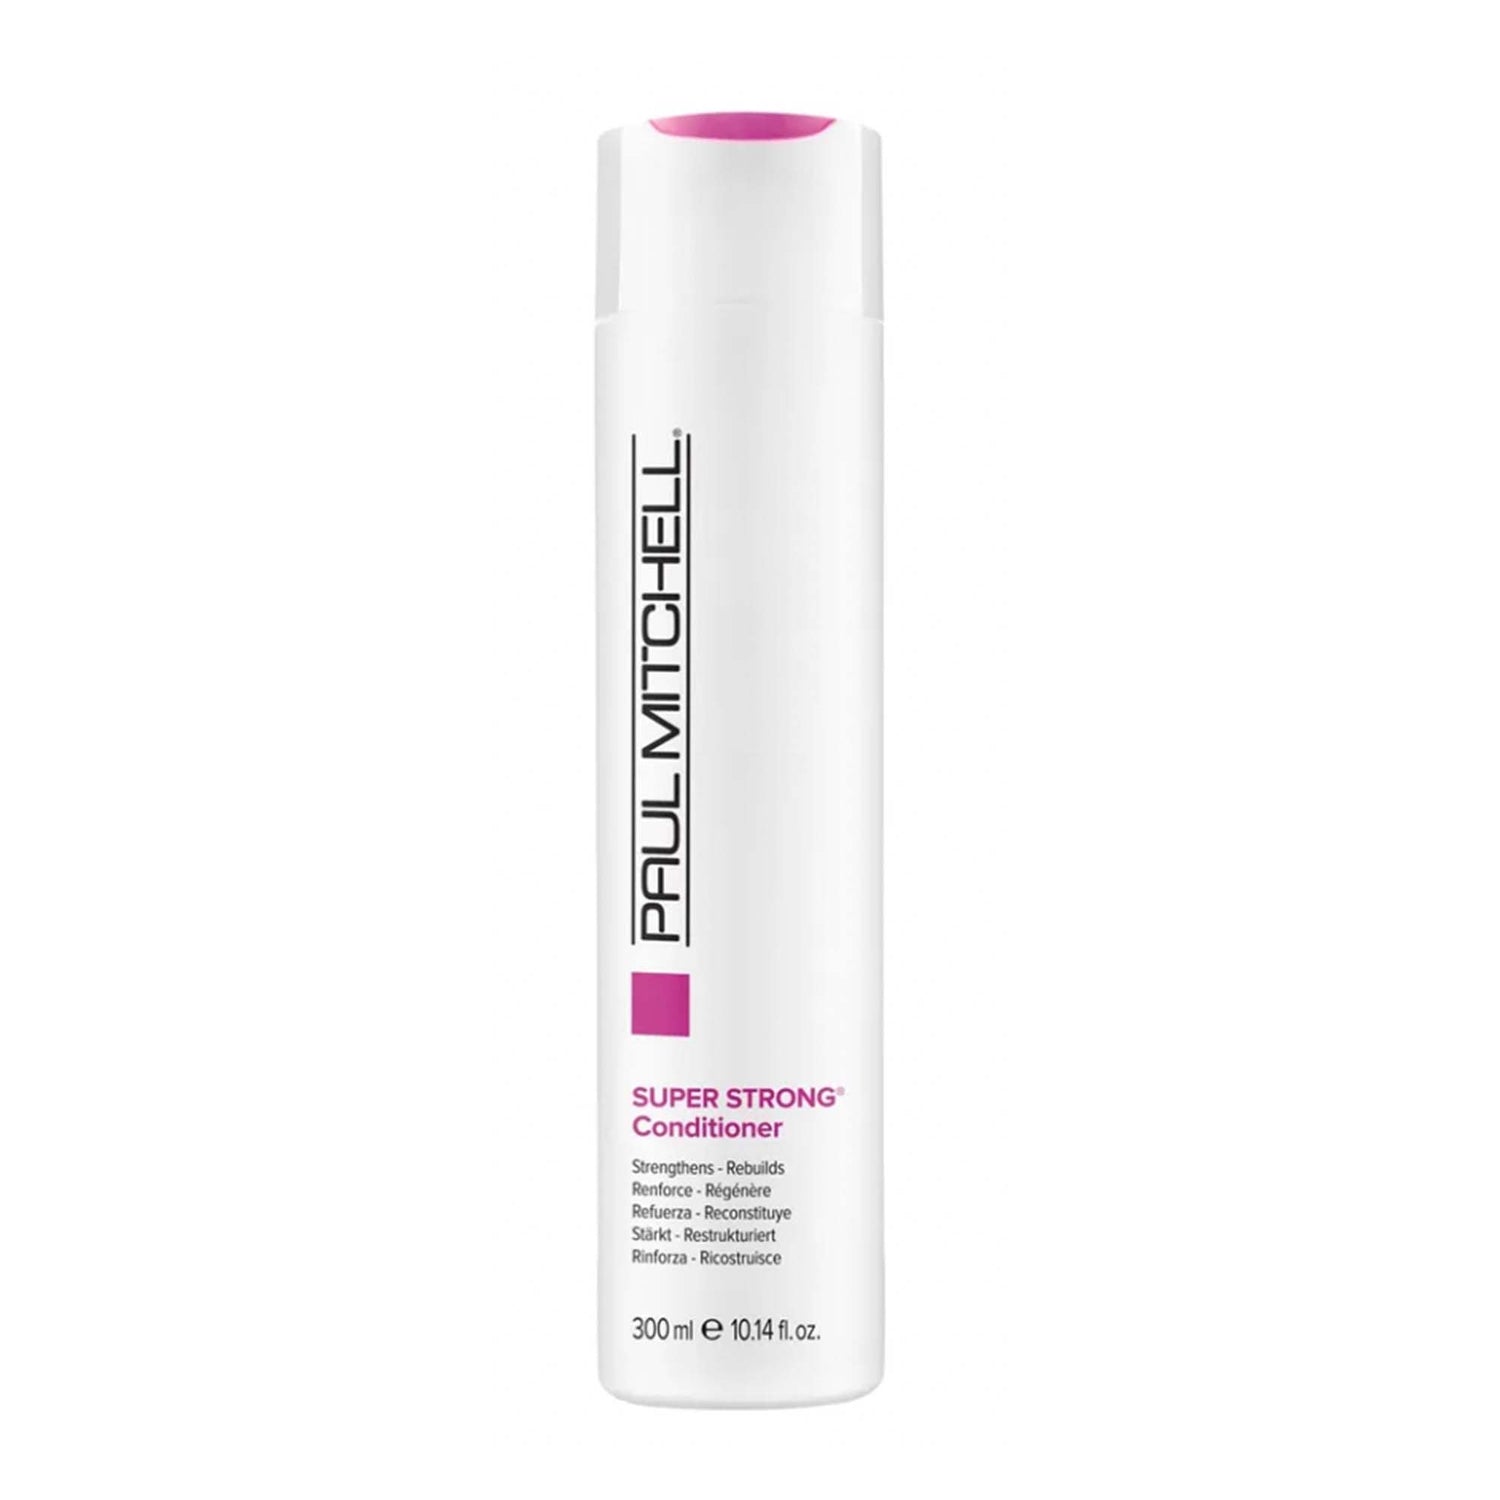 Paul Mitchell Super Strong Conditioner 10.14oz